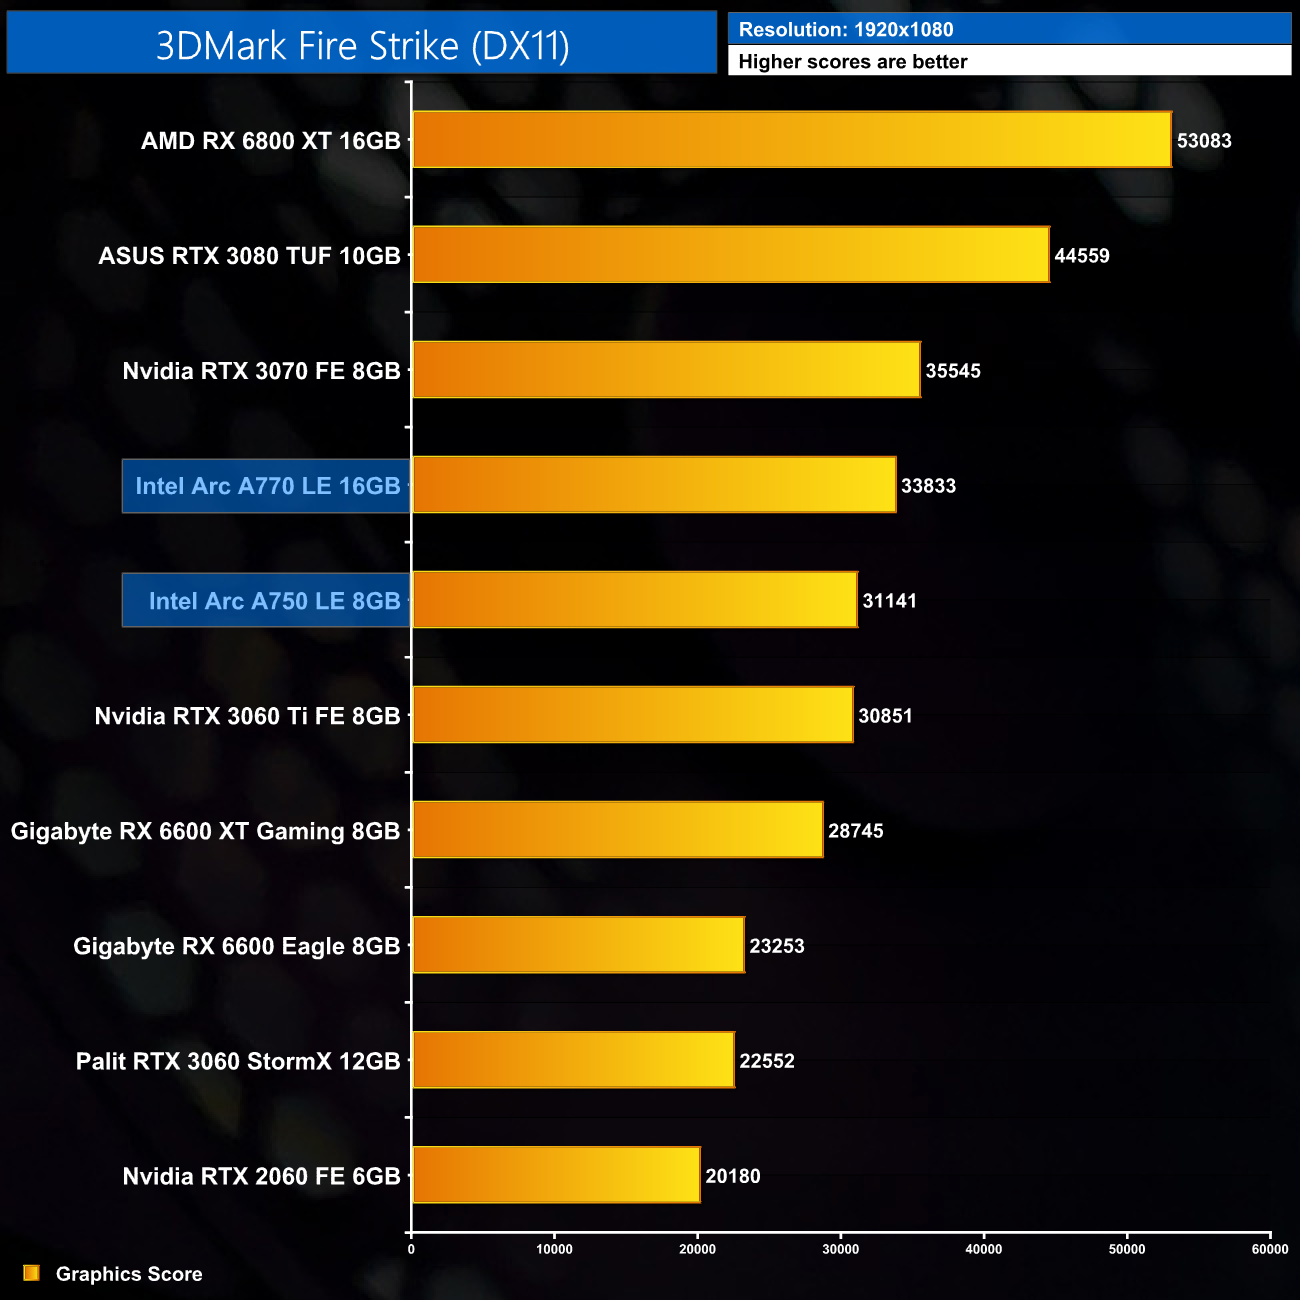 Intel shares first Ray Tracing gaming benchmarks for its high-end Arc A770  GPU